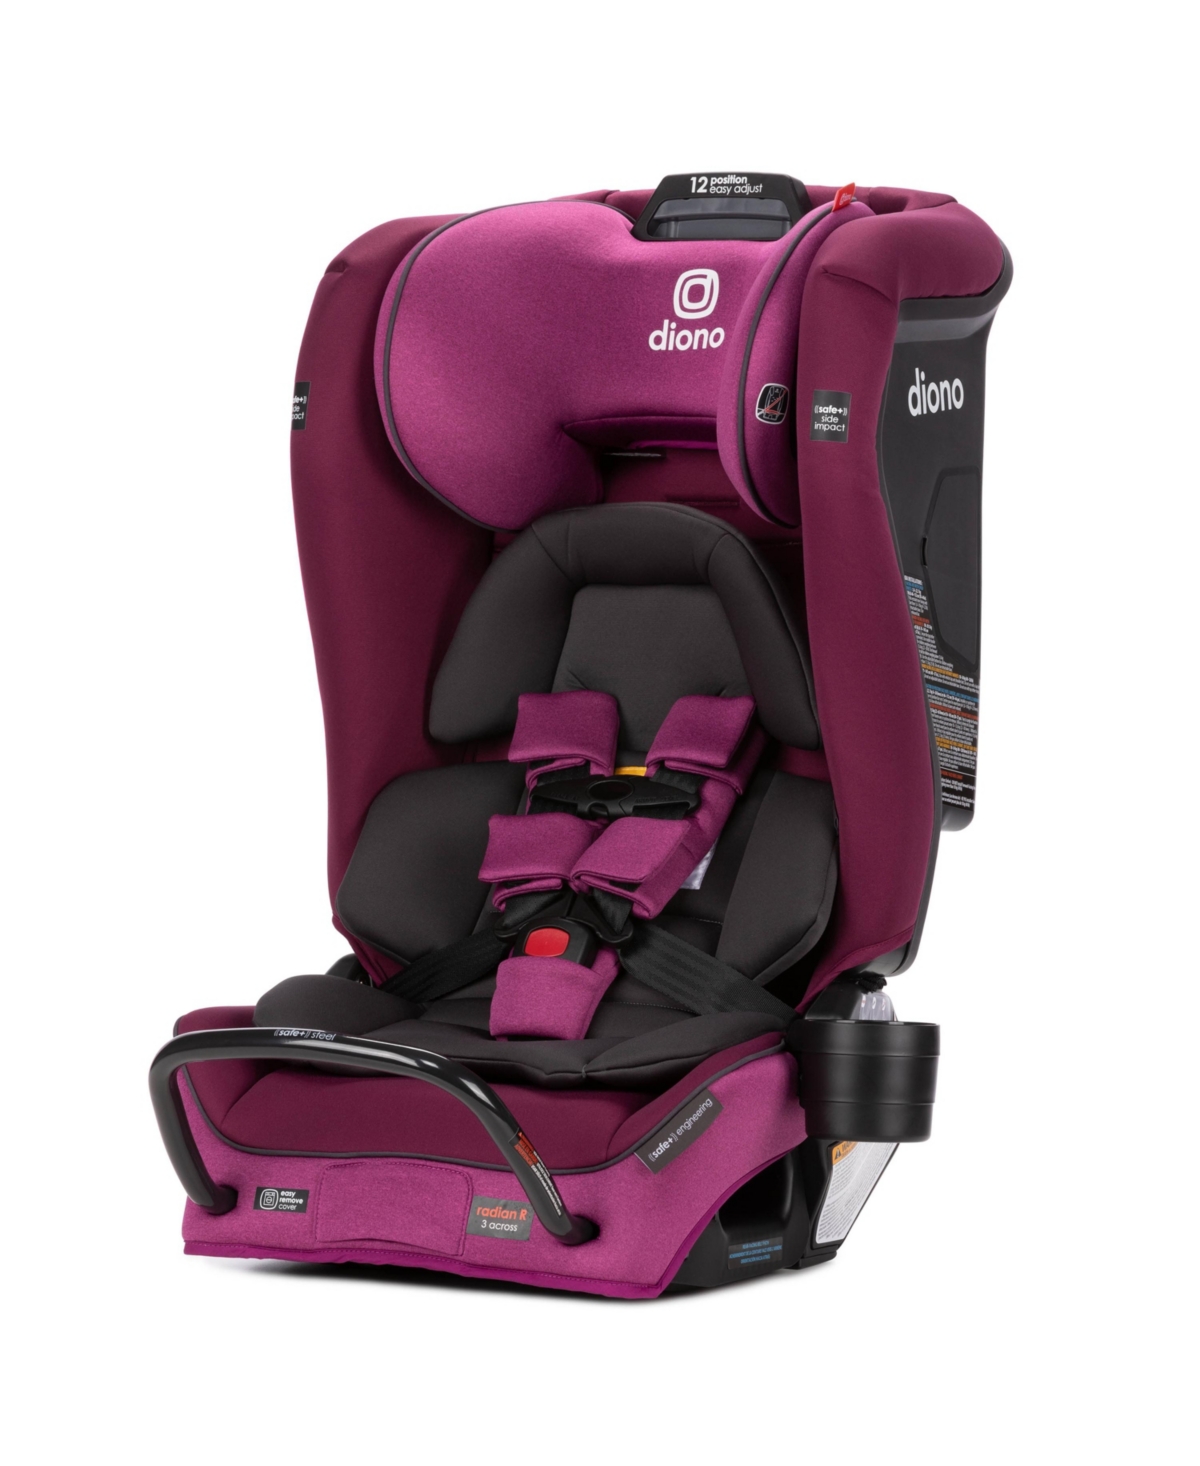 DIONO RADIAN 3RXT SAFEPLUS ALL-IN-ONE CONVERTIBLE CAR SEAT